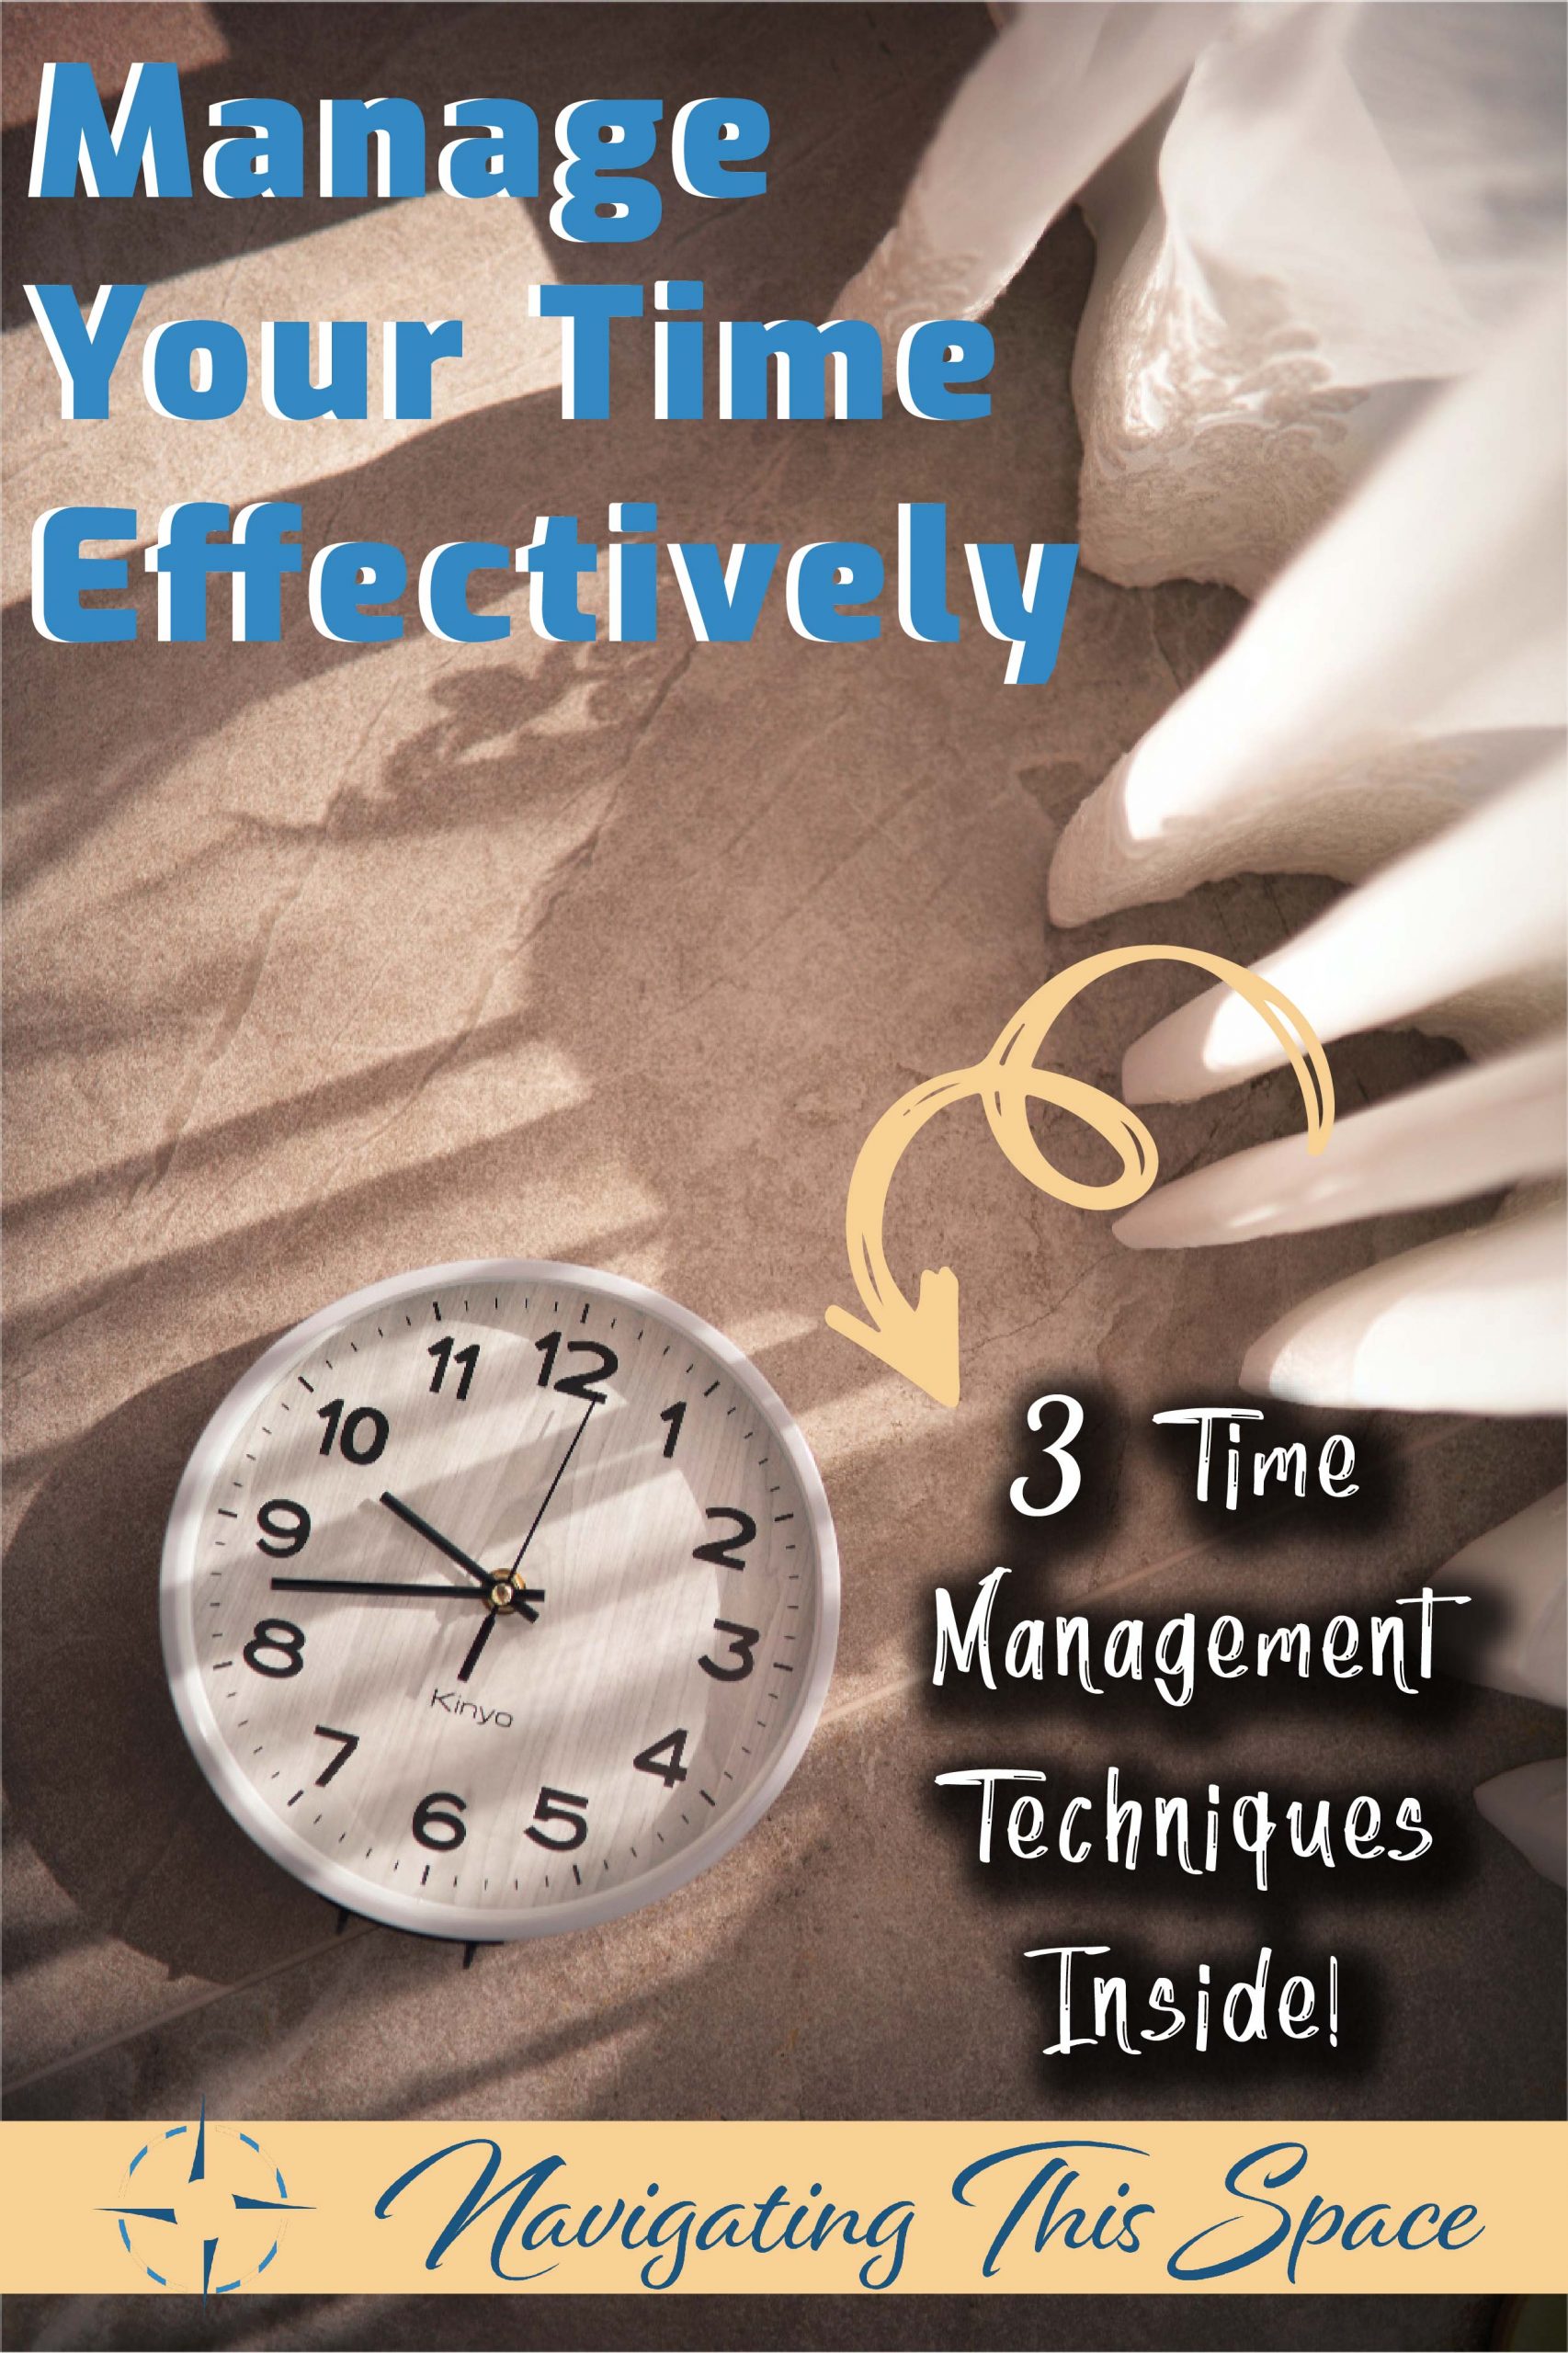 Manage your time effectively - 3 Time management techniques